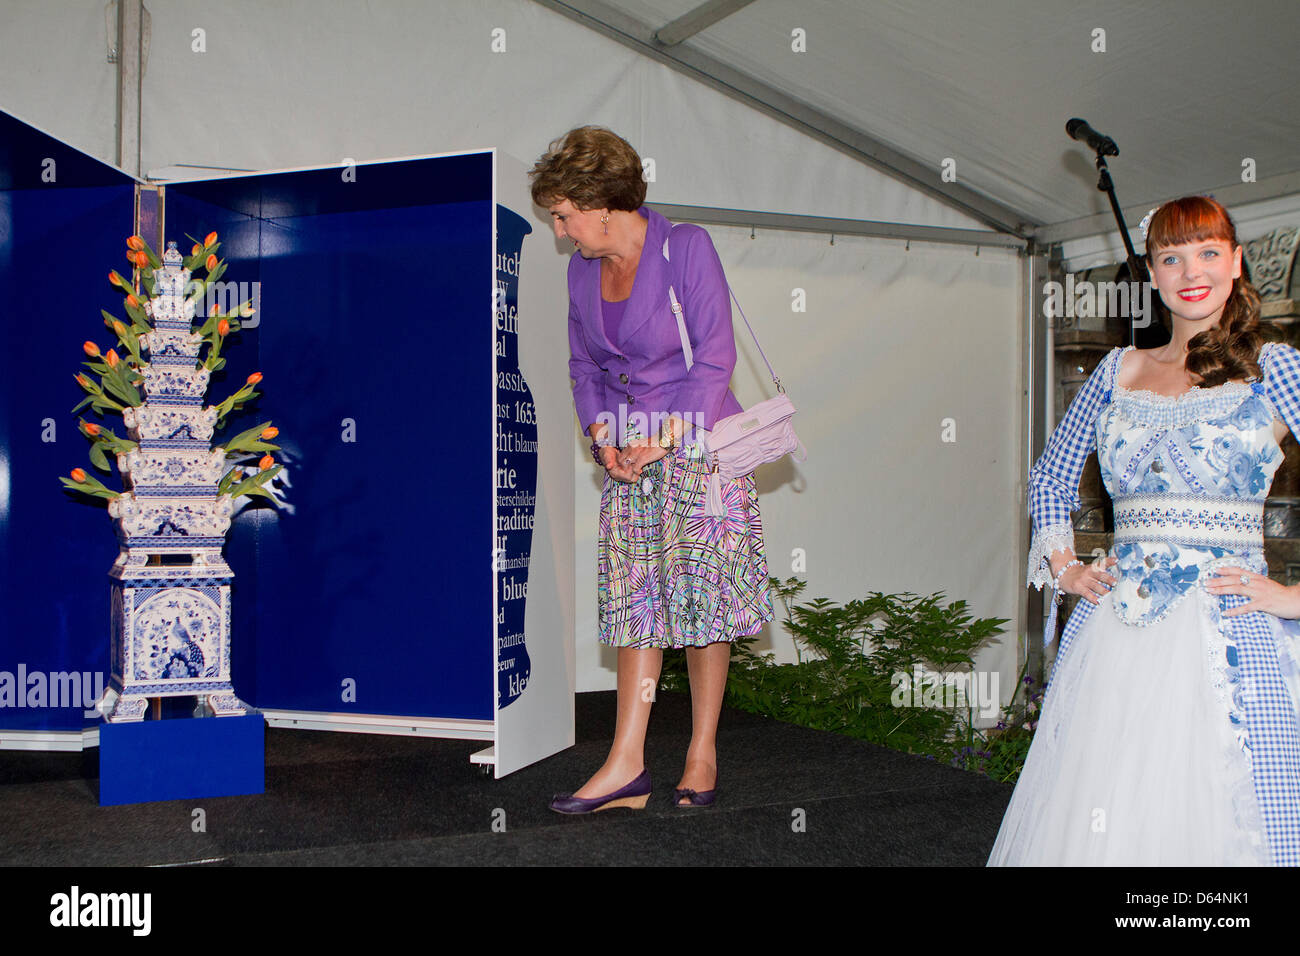 Princess Margriet of The Netherlands opens the Royal Delft Experience multimedia show in the 'Porceleyne Fles' - the Royal Porcelain factory in Delft, The Netherlands, 31 May 2012. Photo: Patrick van Katwijk - NETERLANDS OUT Stock Photo